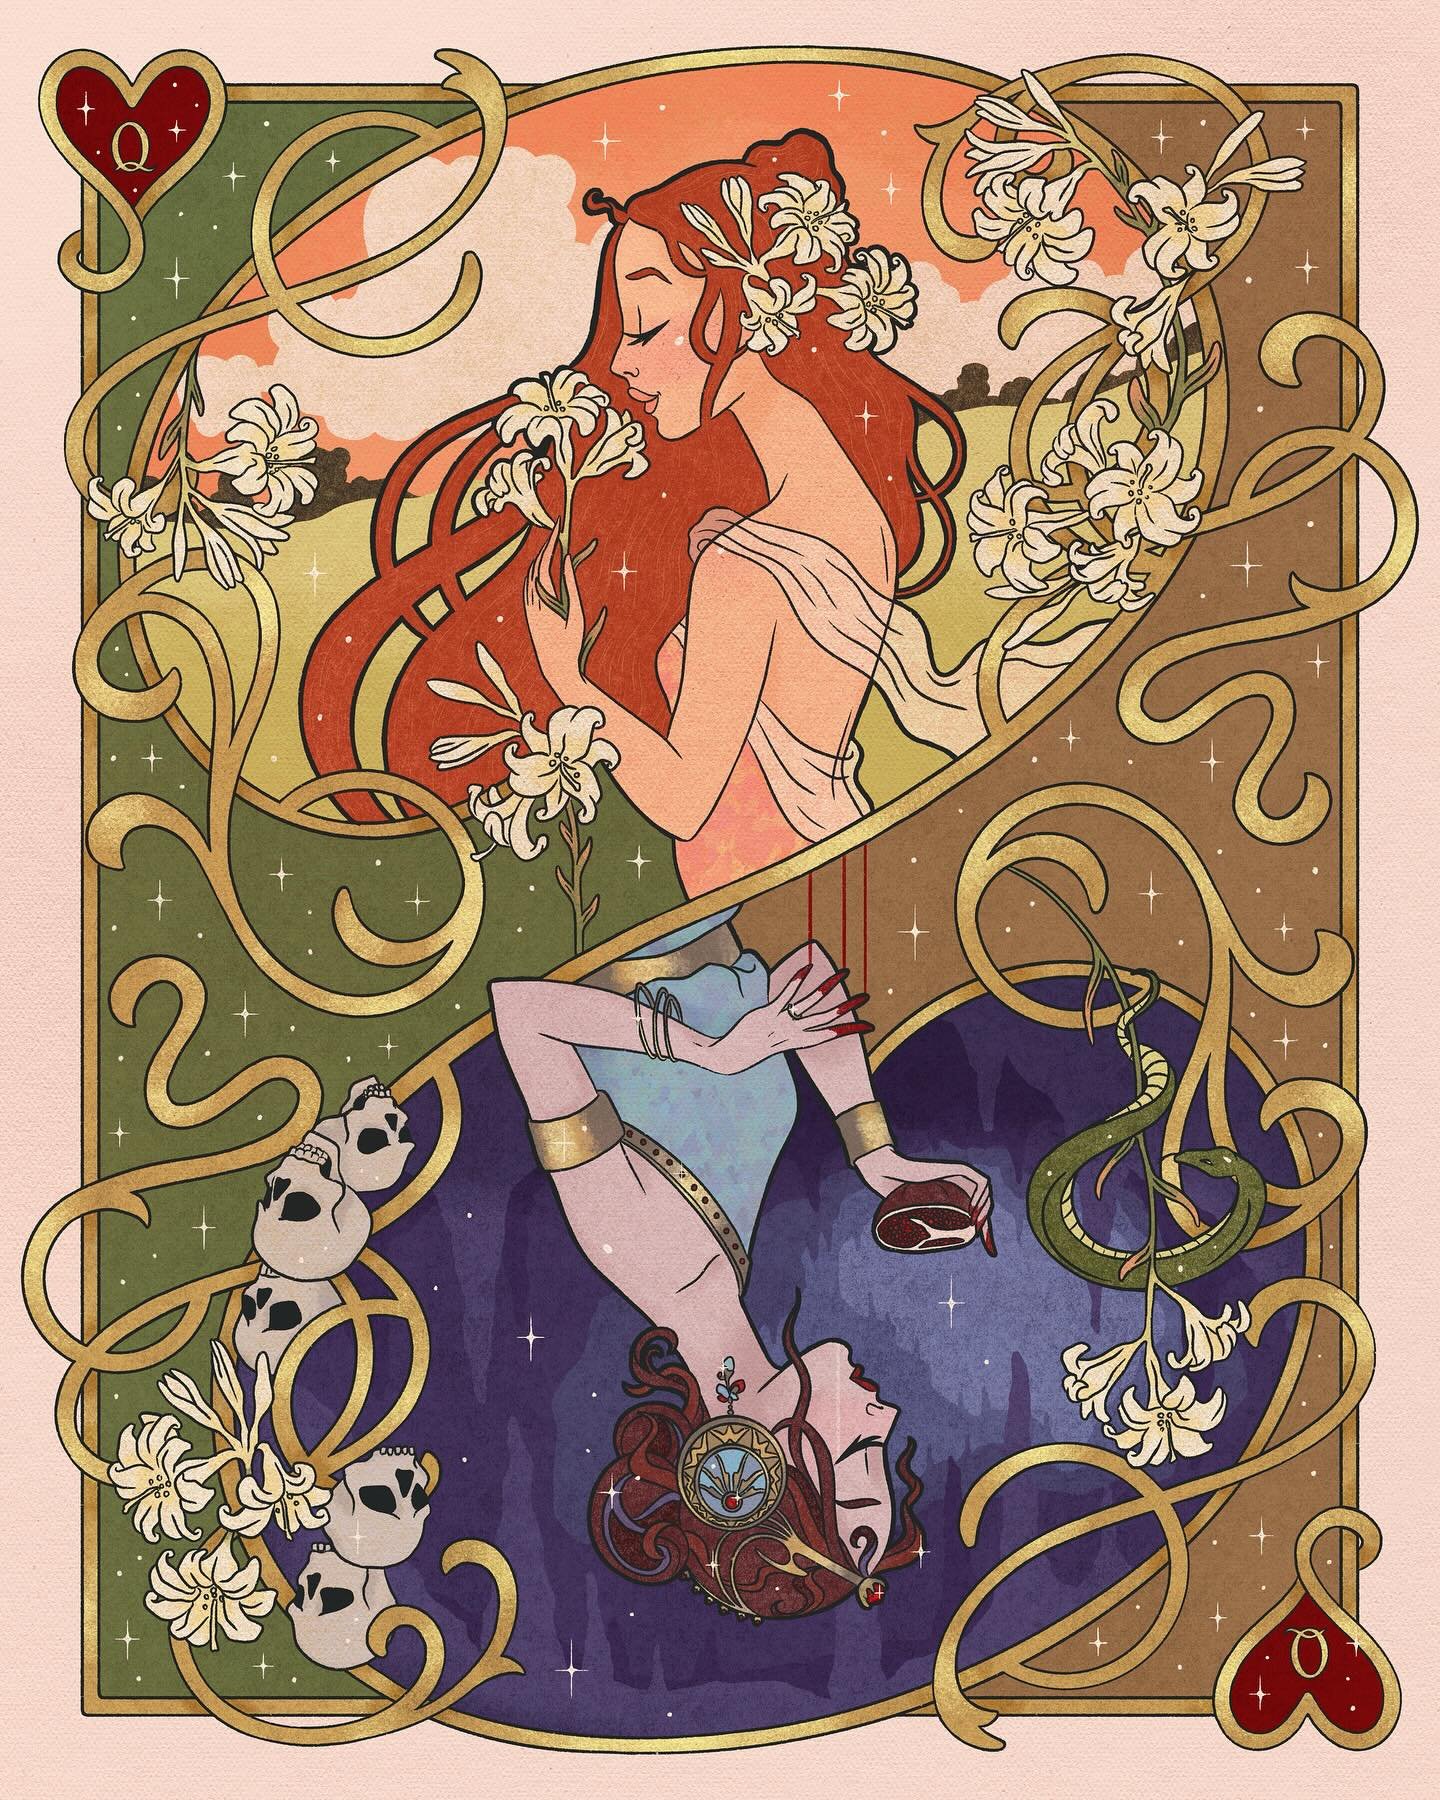 New series alert! I&rsquo;m working on a mythology-inspired series and I want to make 4 queens for each suite in a card deck. If I feel ambitious, maybe I&rsquo;ll make jacks and kings (but as ladies of course lol)&hellip;I love the art nouveau style